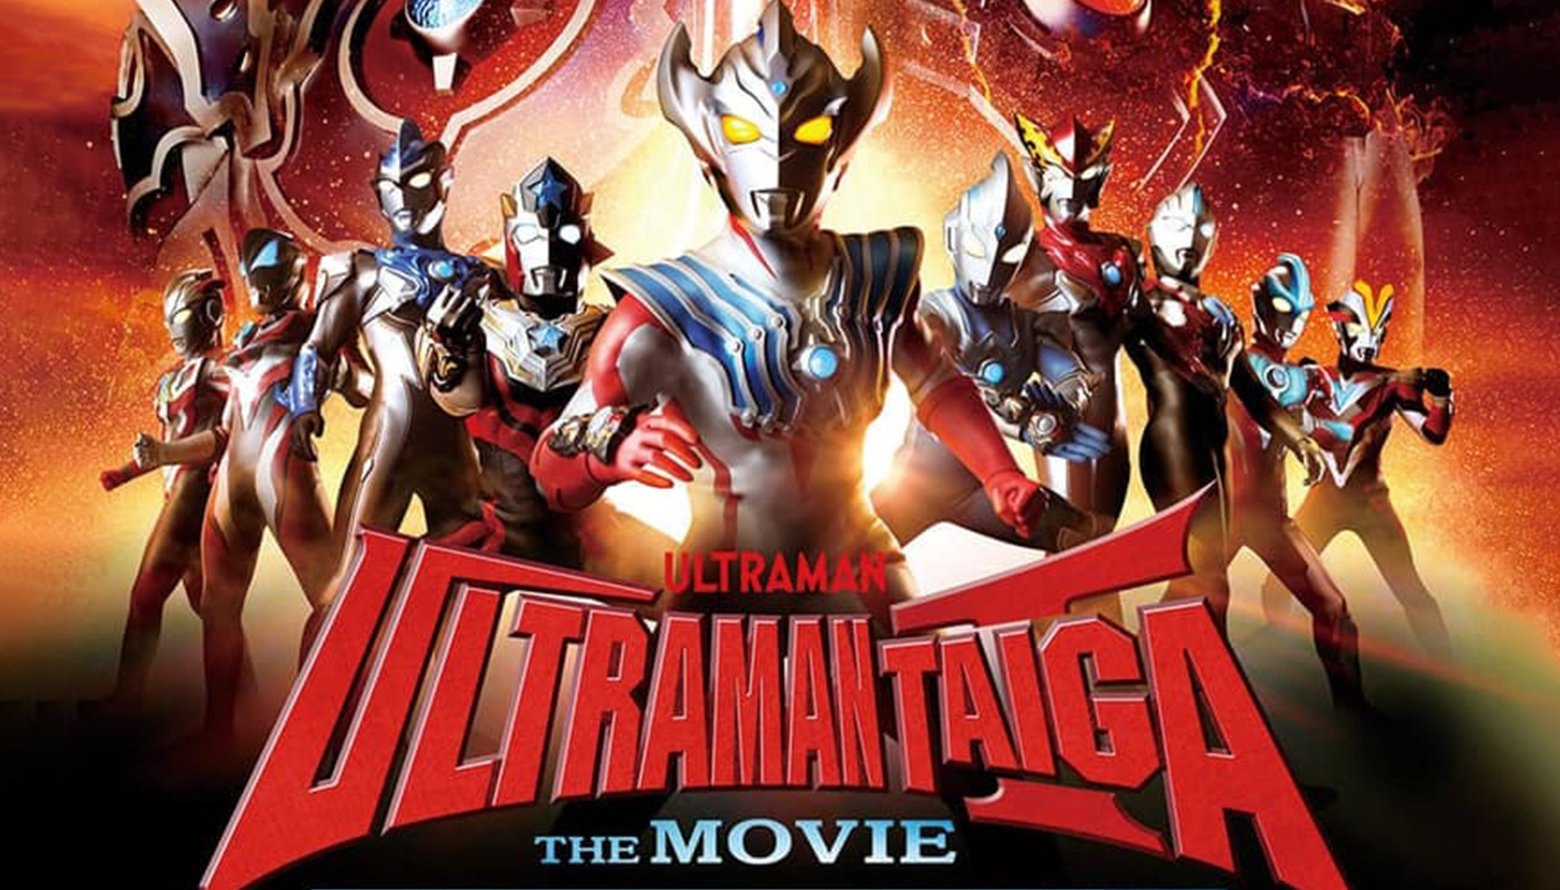 ULTRAMAN TAIGA NEXT FEATURE FILM TO HIT THEATERS IN JAPAN